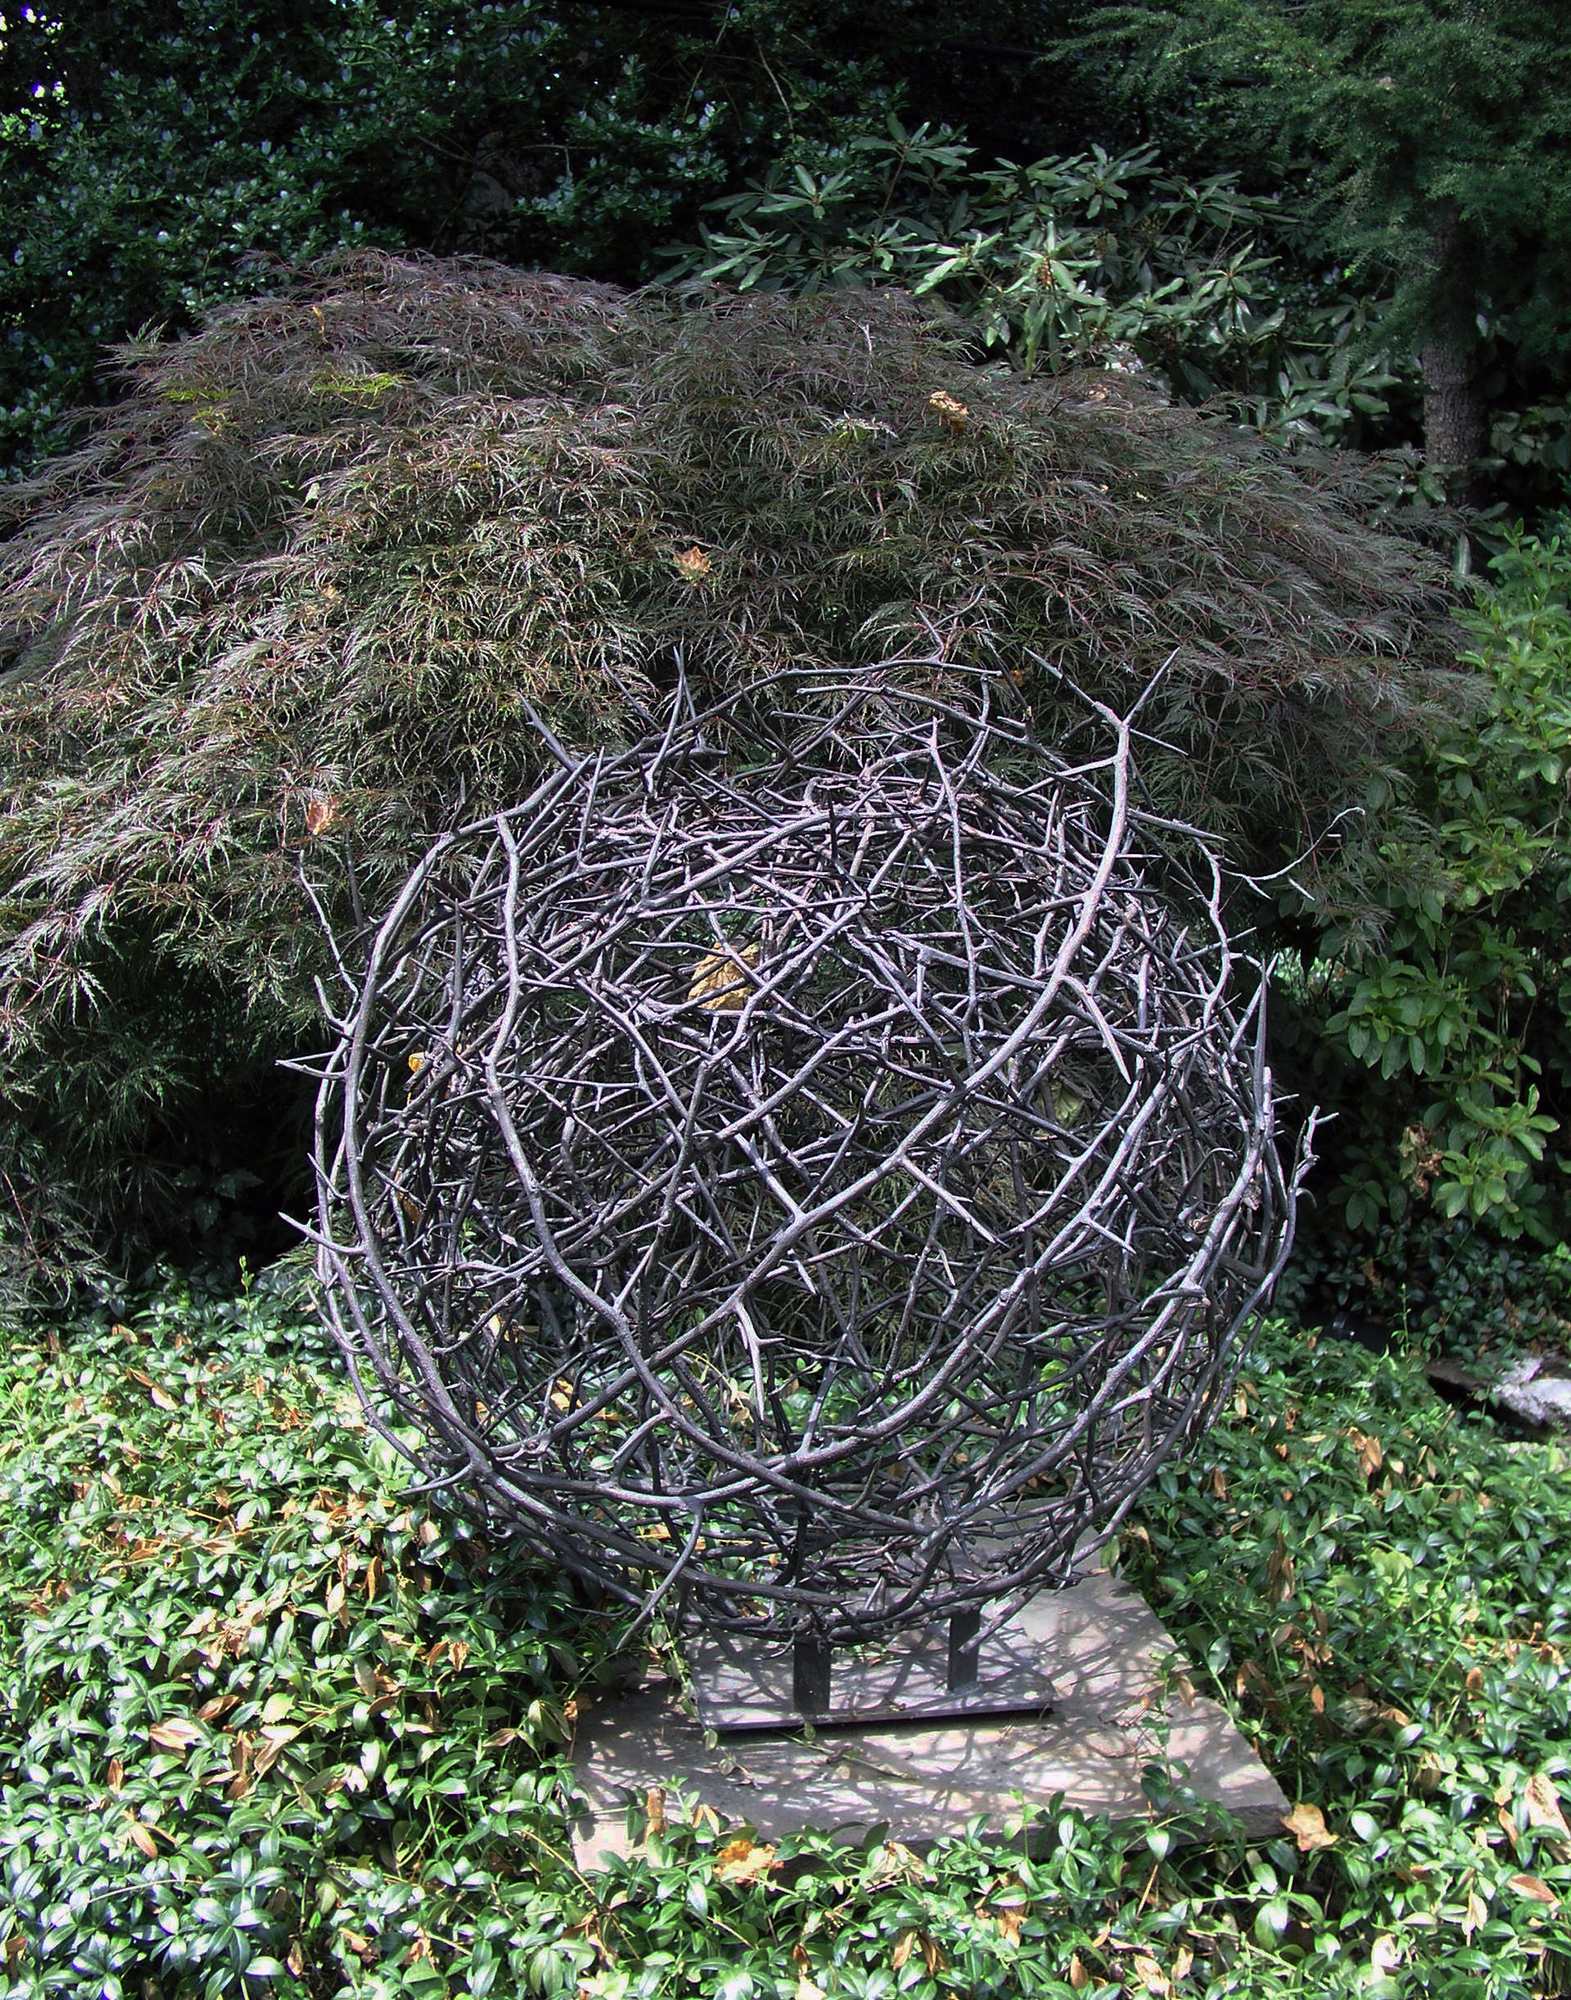 Ball of Thorns